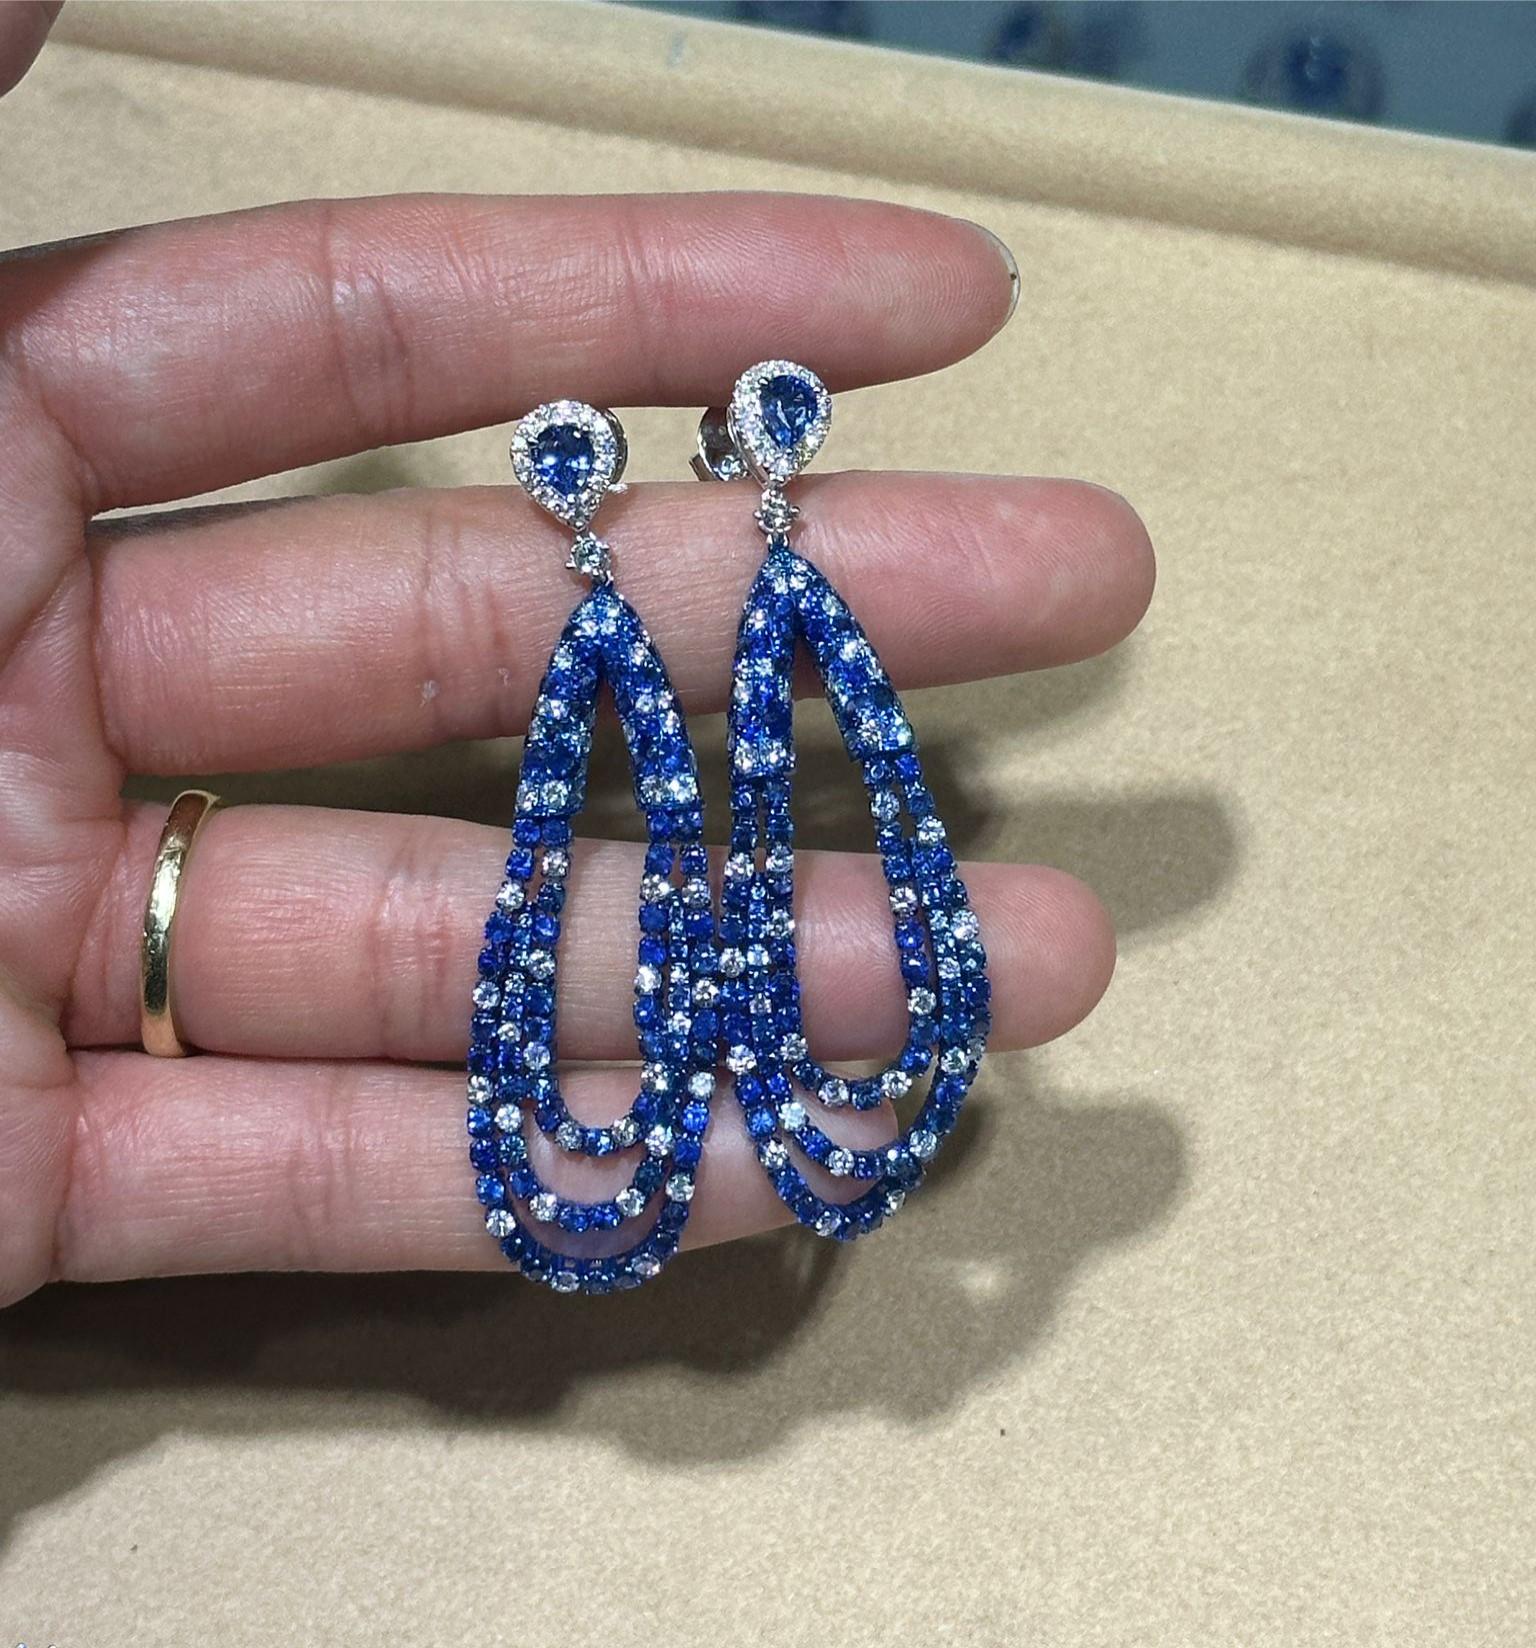 The Following Items we are offering is a Rare Important Spectacular and Brilliant White Gold Large Gorgeous Fancy Blue Sapphire Diamond Draped Dangle Earrings. Earrings consists of Rare Fine Magnificent Glittering Blue Sapphires and Gorgeous